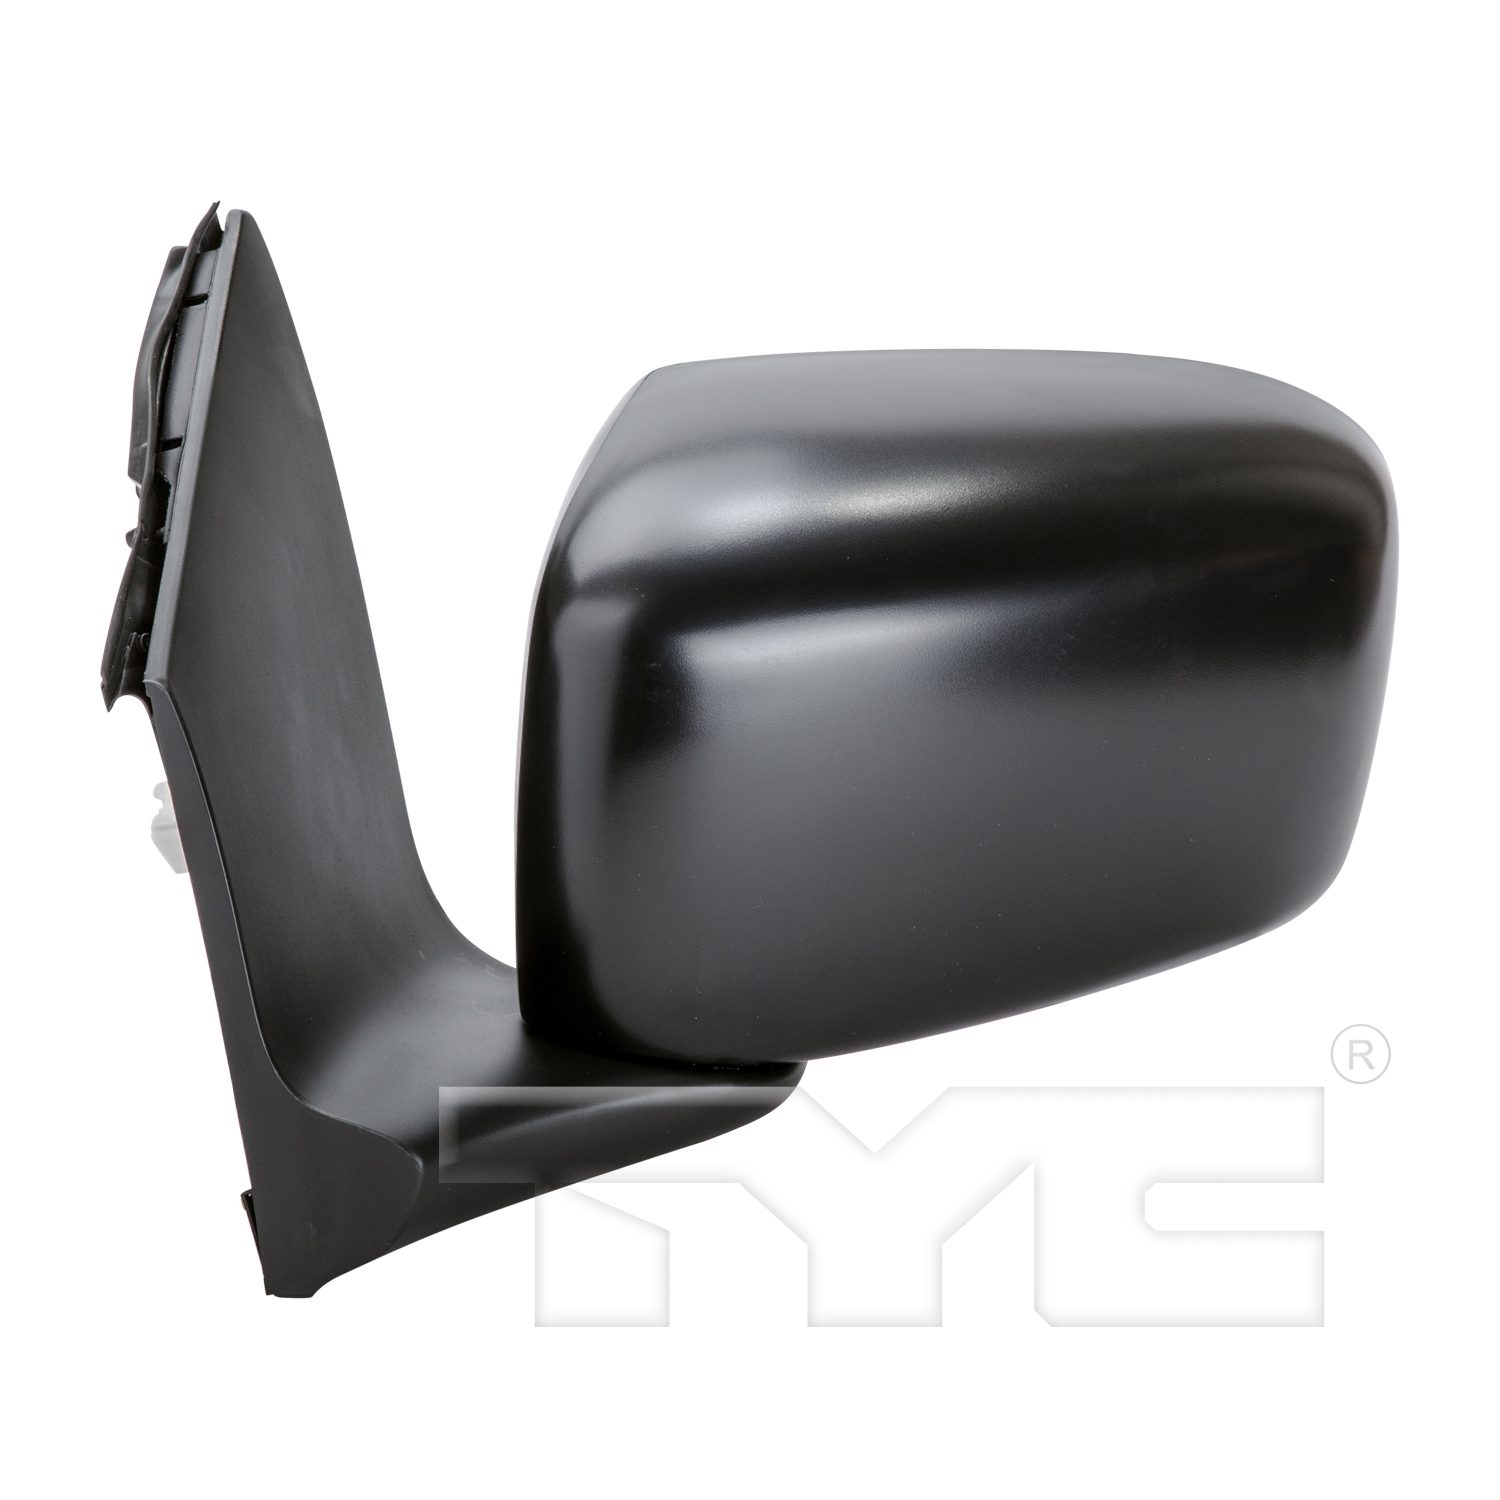 Aftermarket MIRRORS for HONDA - ODYSSEY, ODYSSEY,05-10,LT Mirror outside rear view